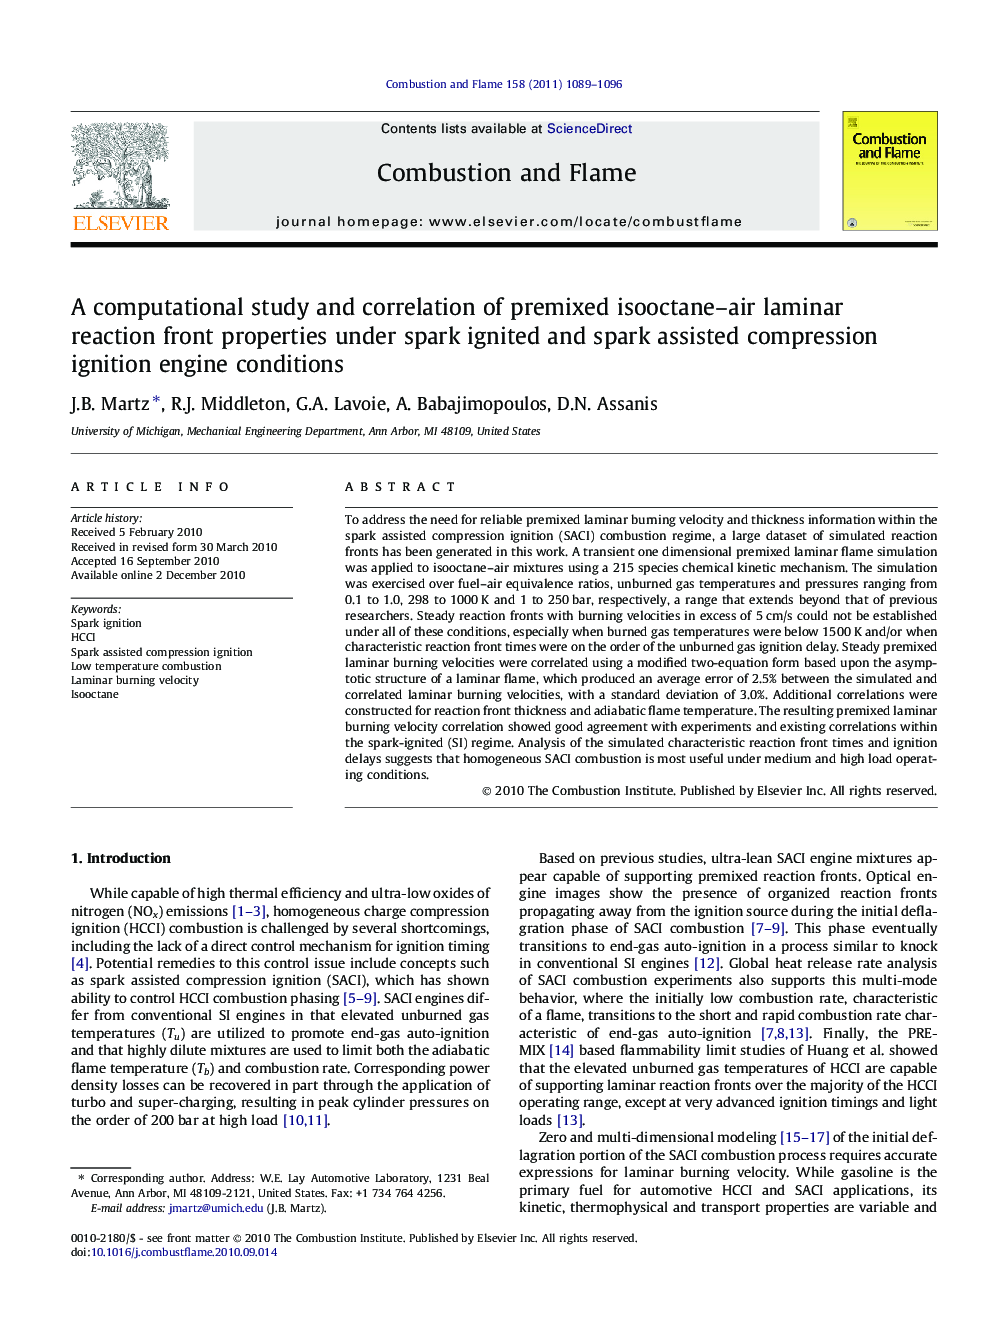 A computational study and correlation of premixed isooctane–air laminar reaction front properties under spark ignited and spark assisted compression ignition engine conditions